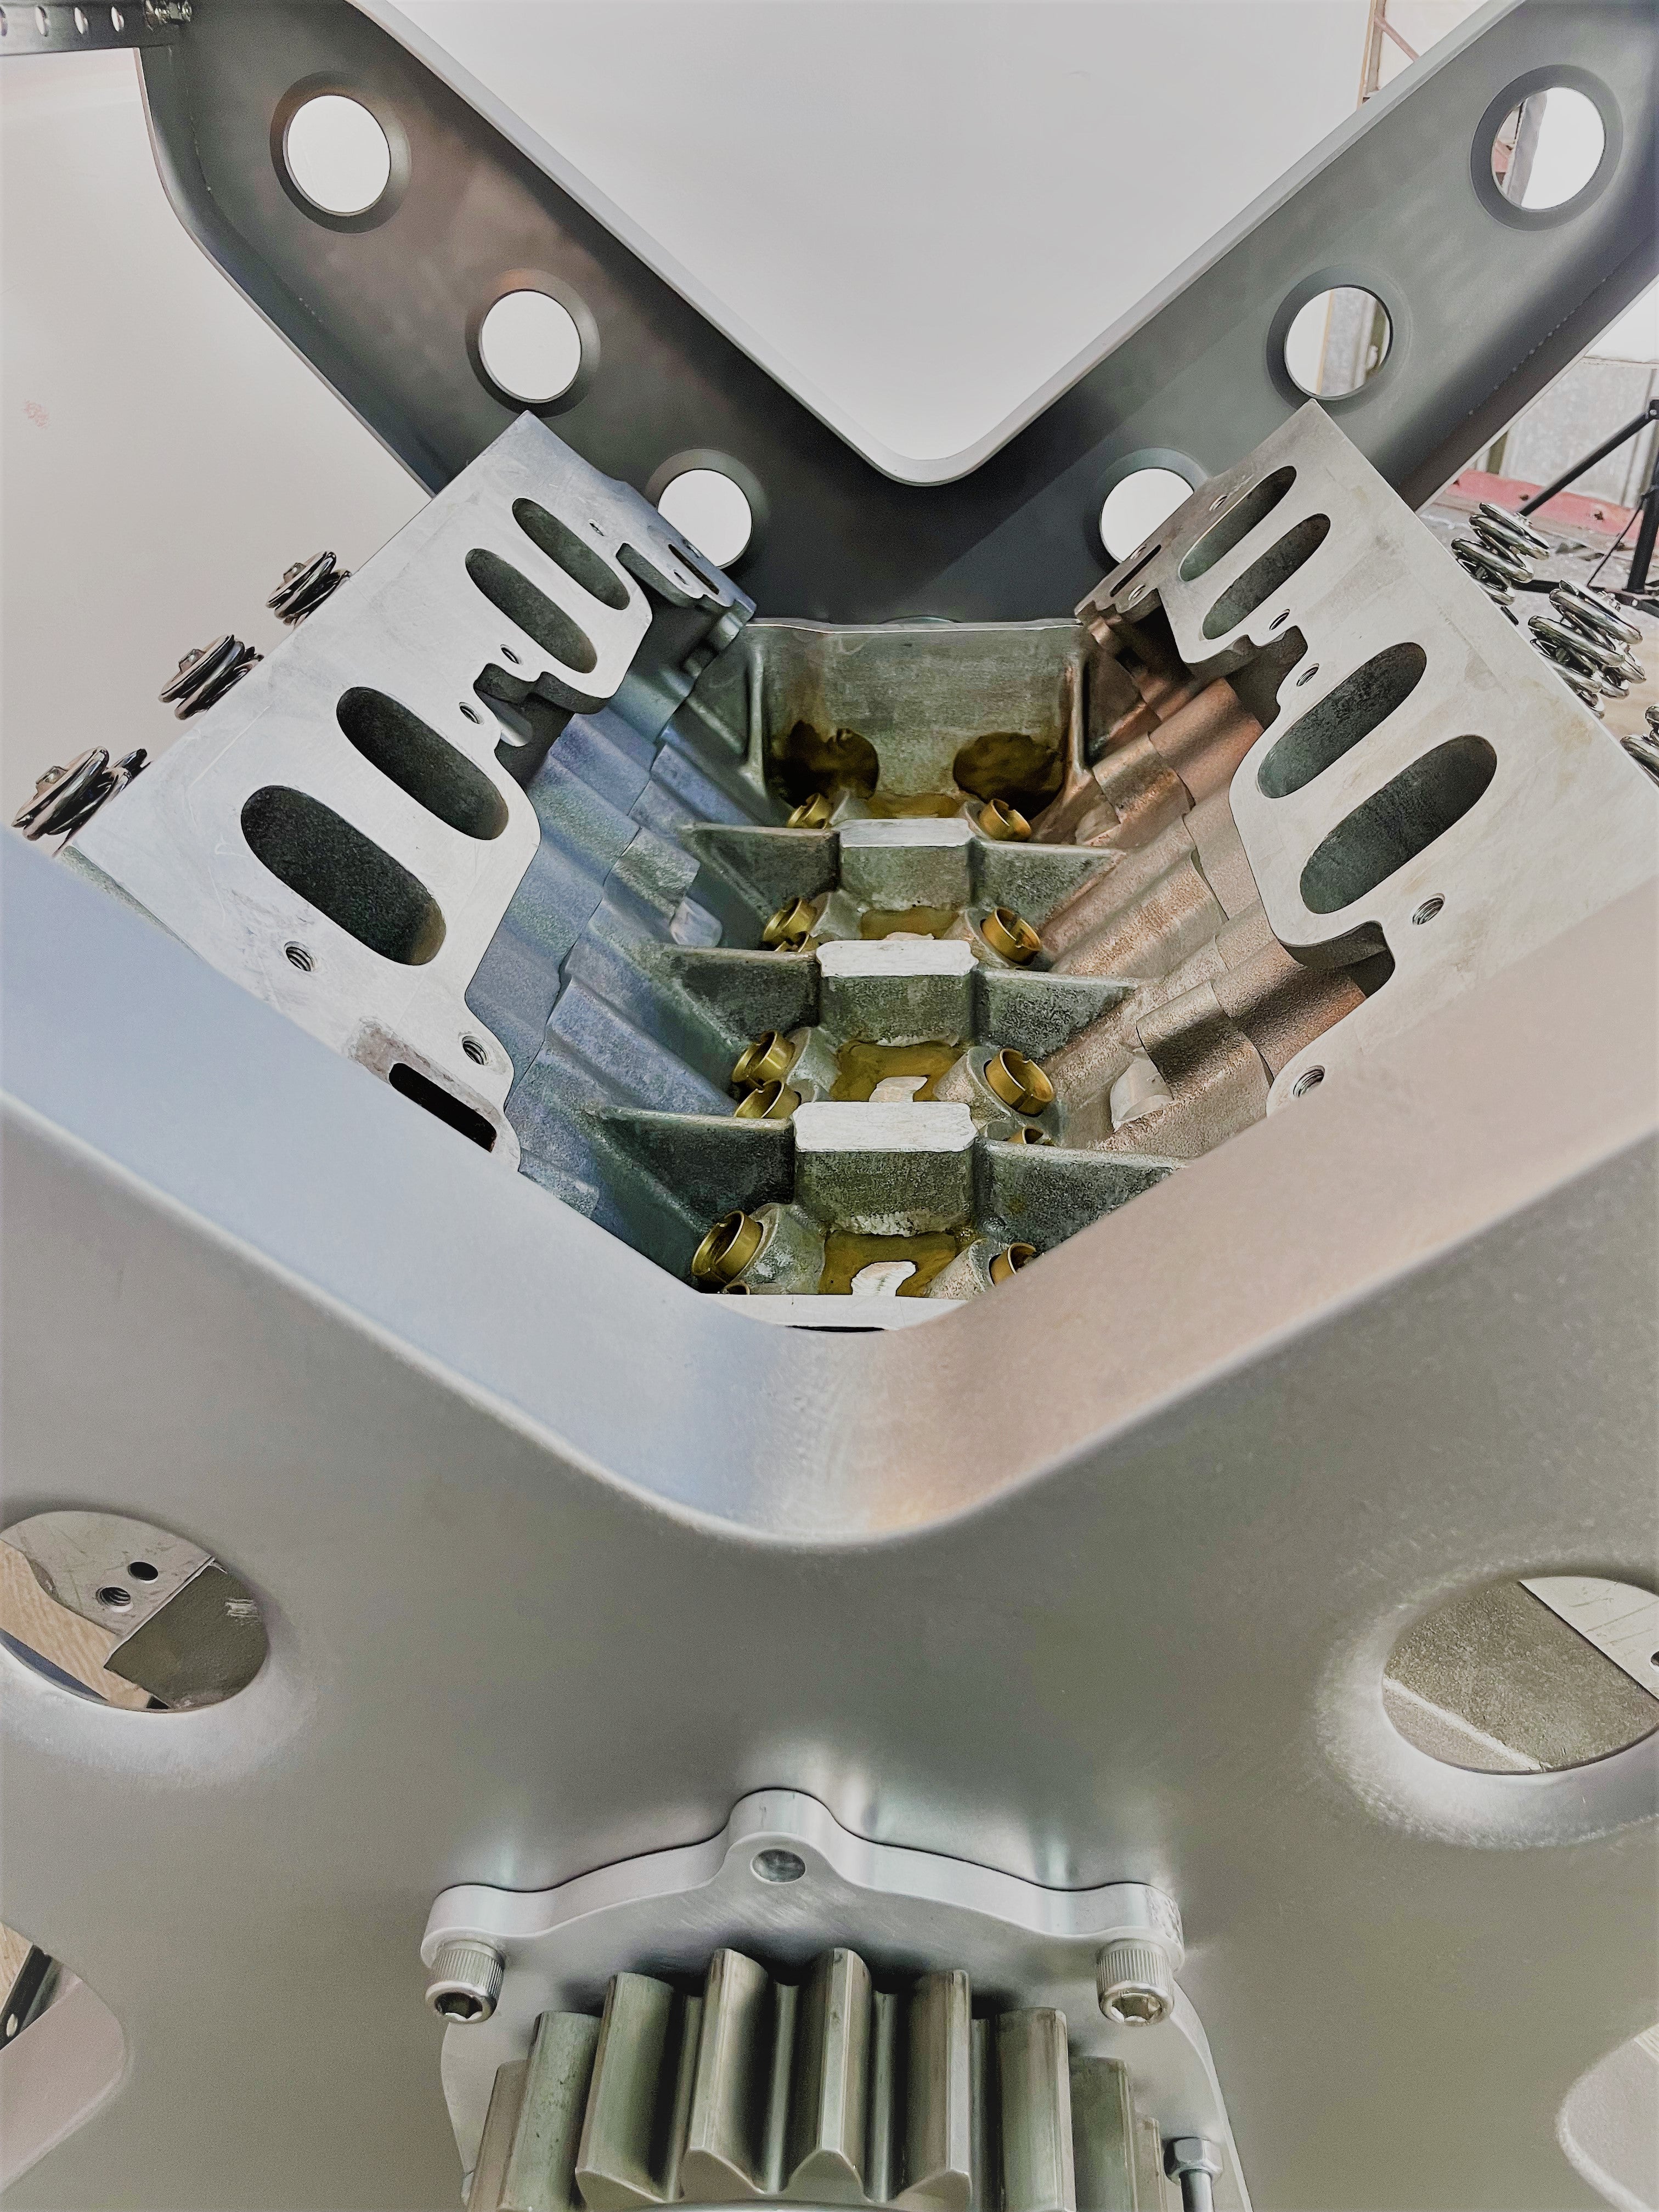 Close-up view of the rotating engine within a X-frame dining table.